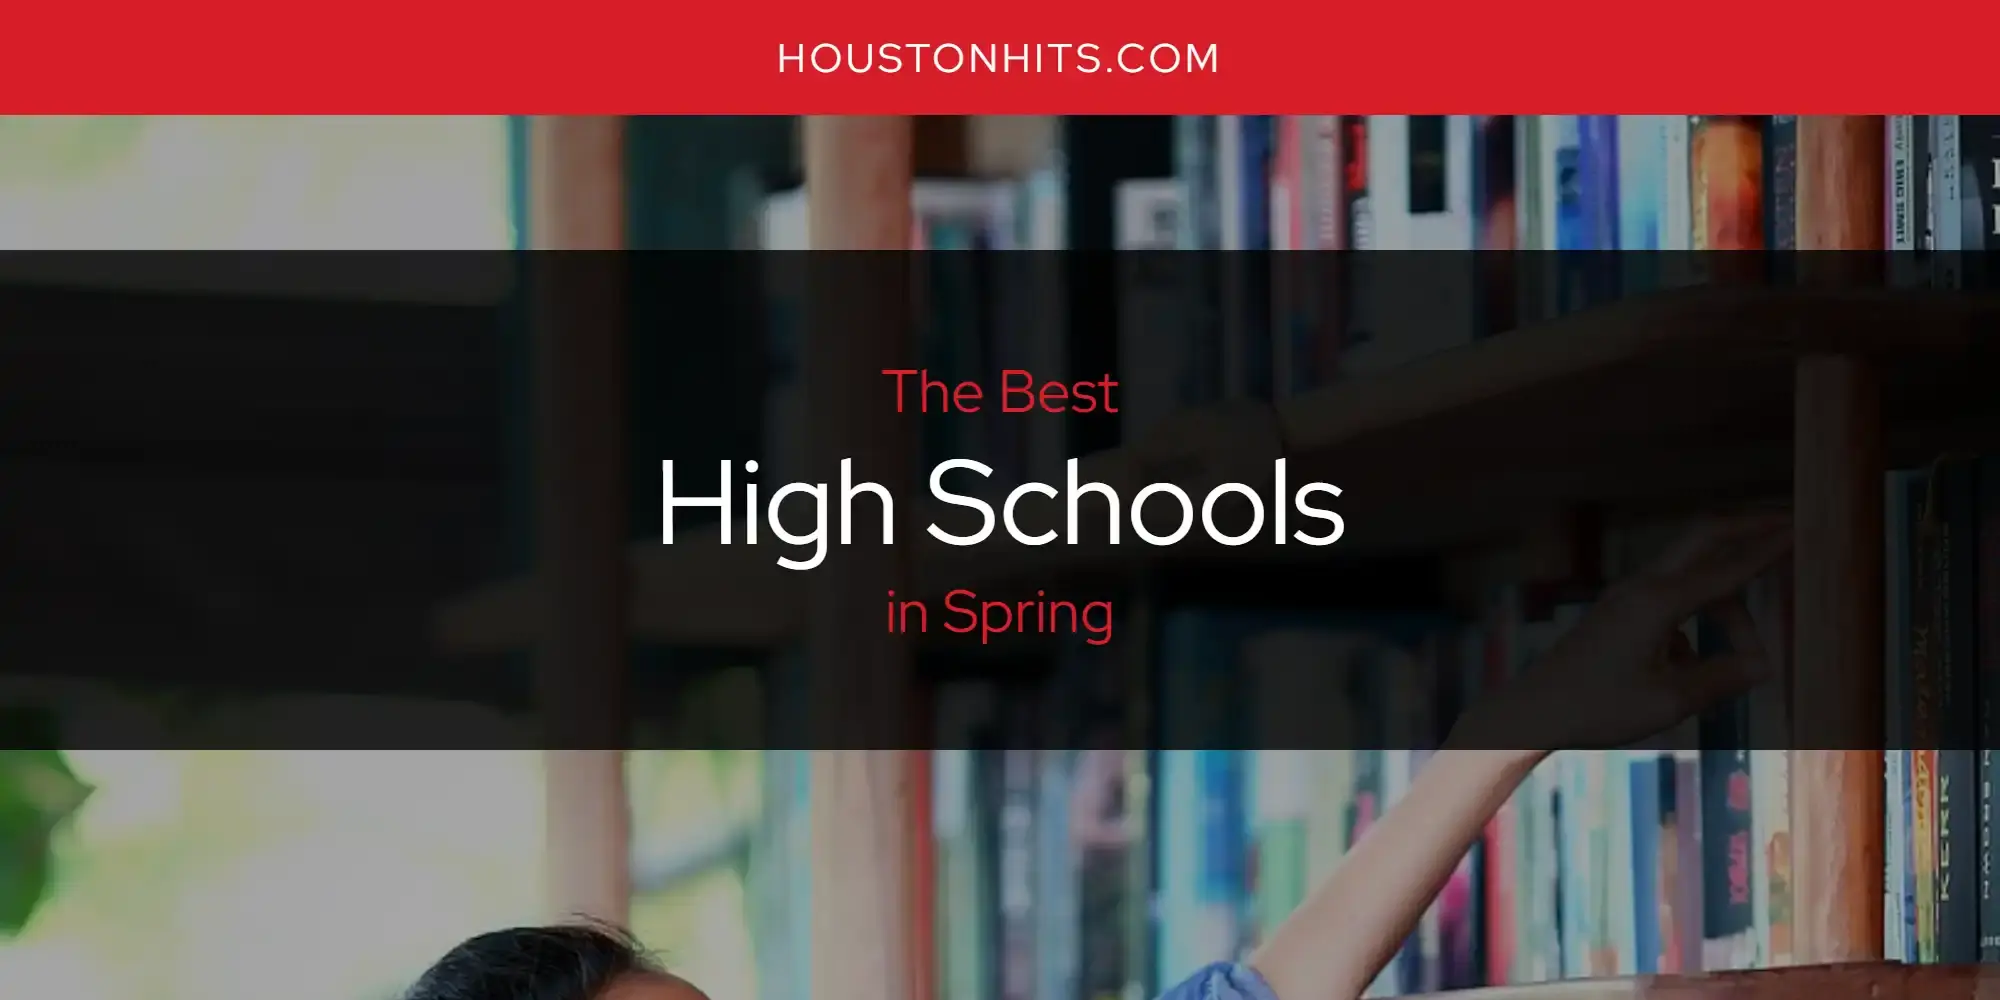 Best High Schools in Spring? Here's the Top 17